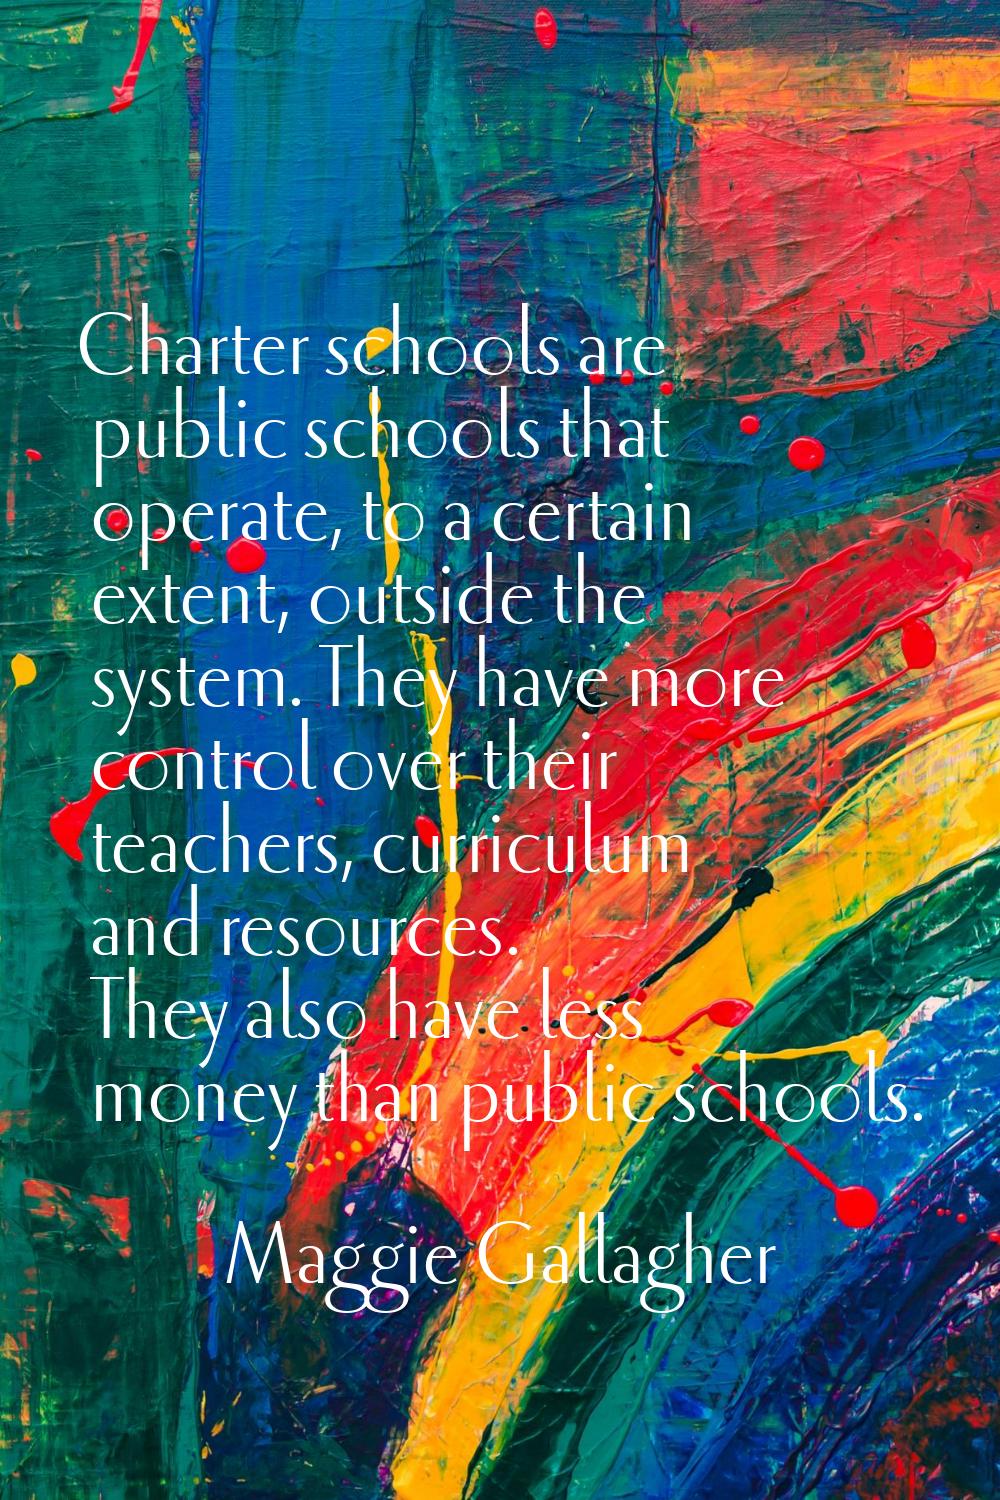 Charter schools are public schools that operate, to a certain extent, outside the system. They have